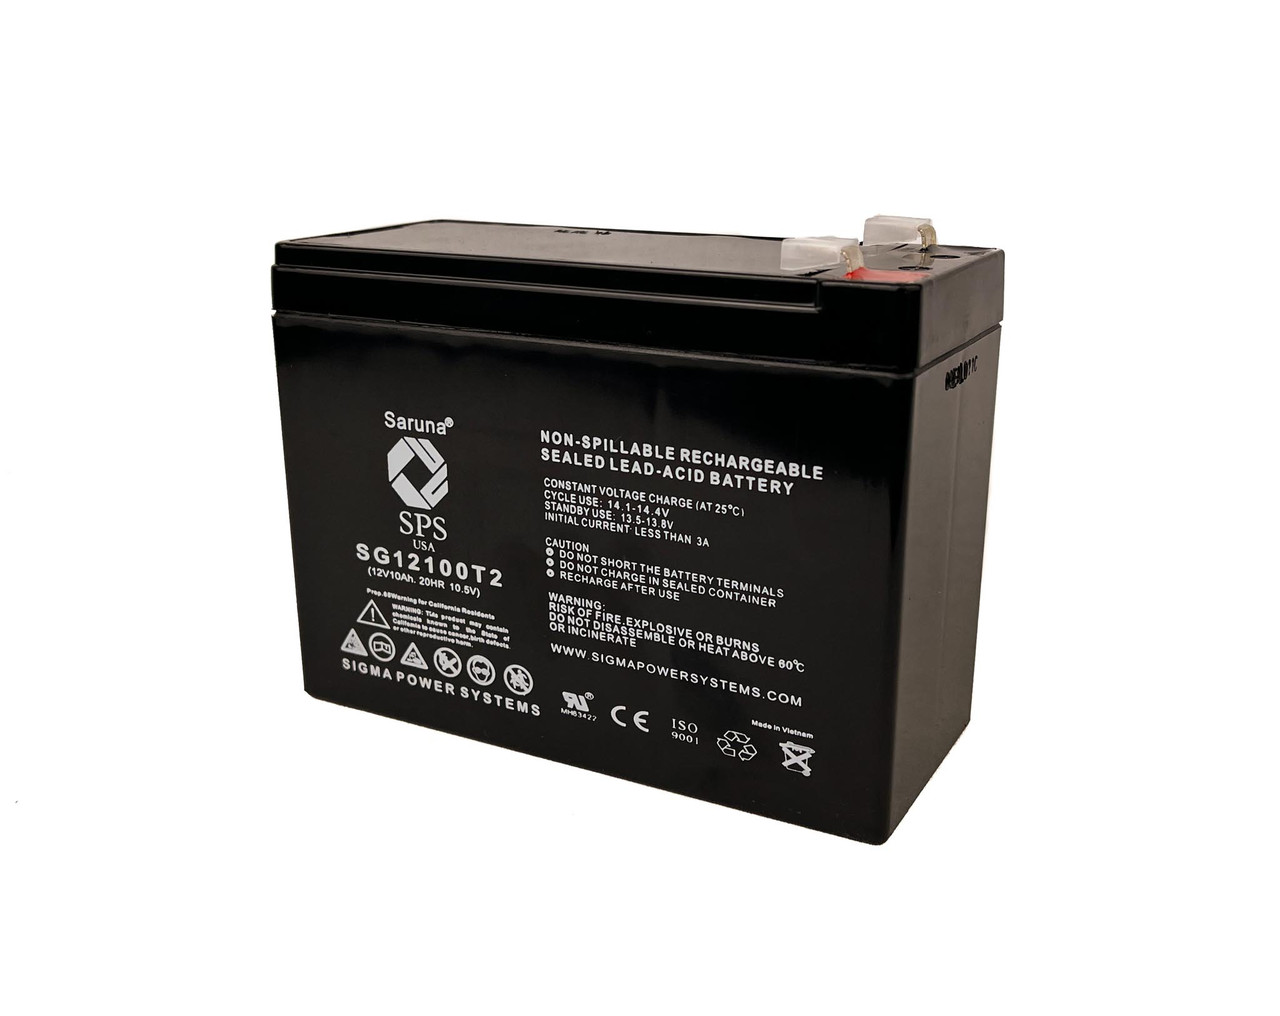 Raion Power 12V 10Ah Non-Spillable Replacement Rechargebale Battery for Neptune NT12-10F2